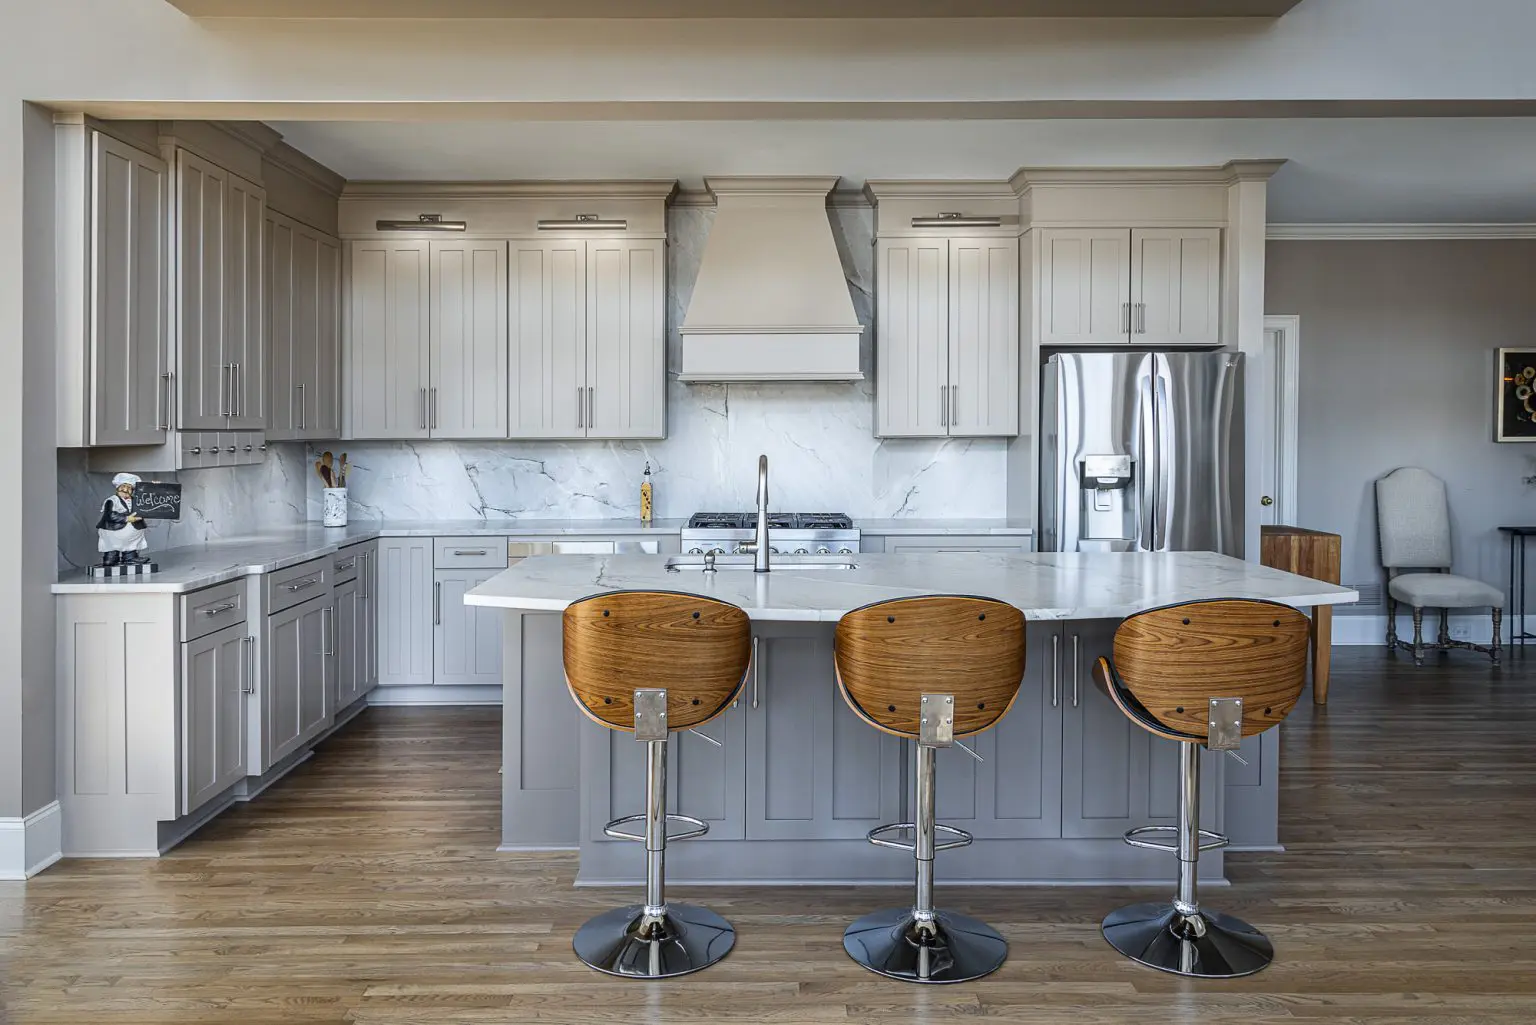 Sleek kitchen with taupe cabinets, marble backsplash, and contemporary wooden bar stools